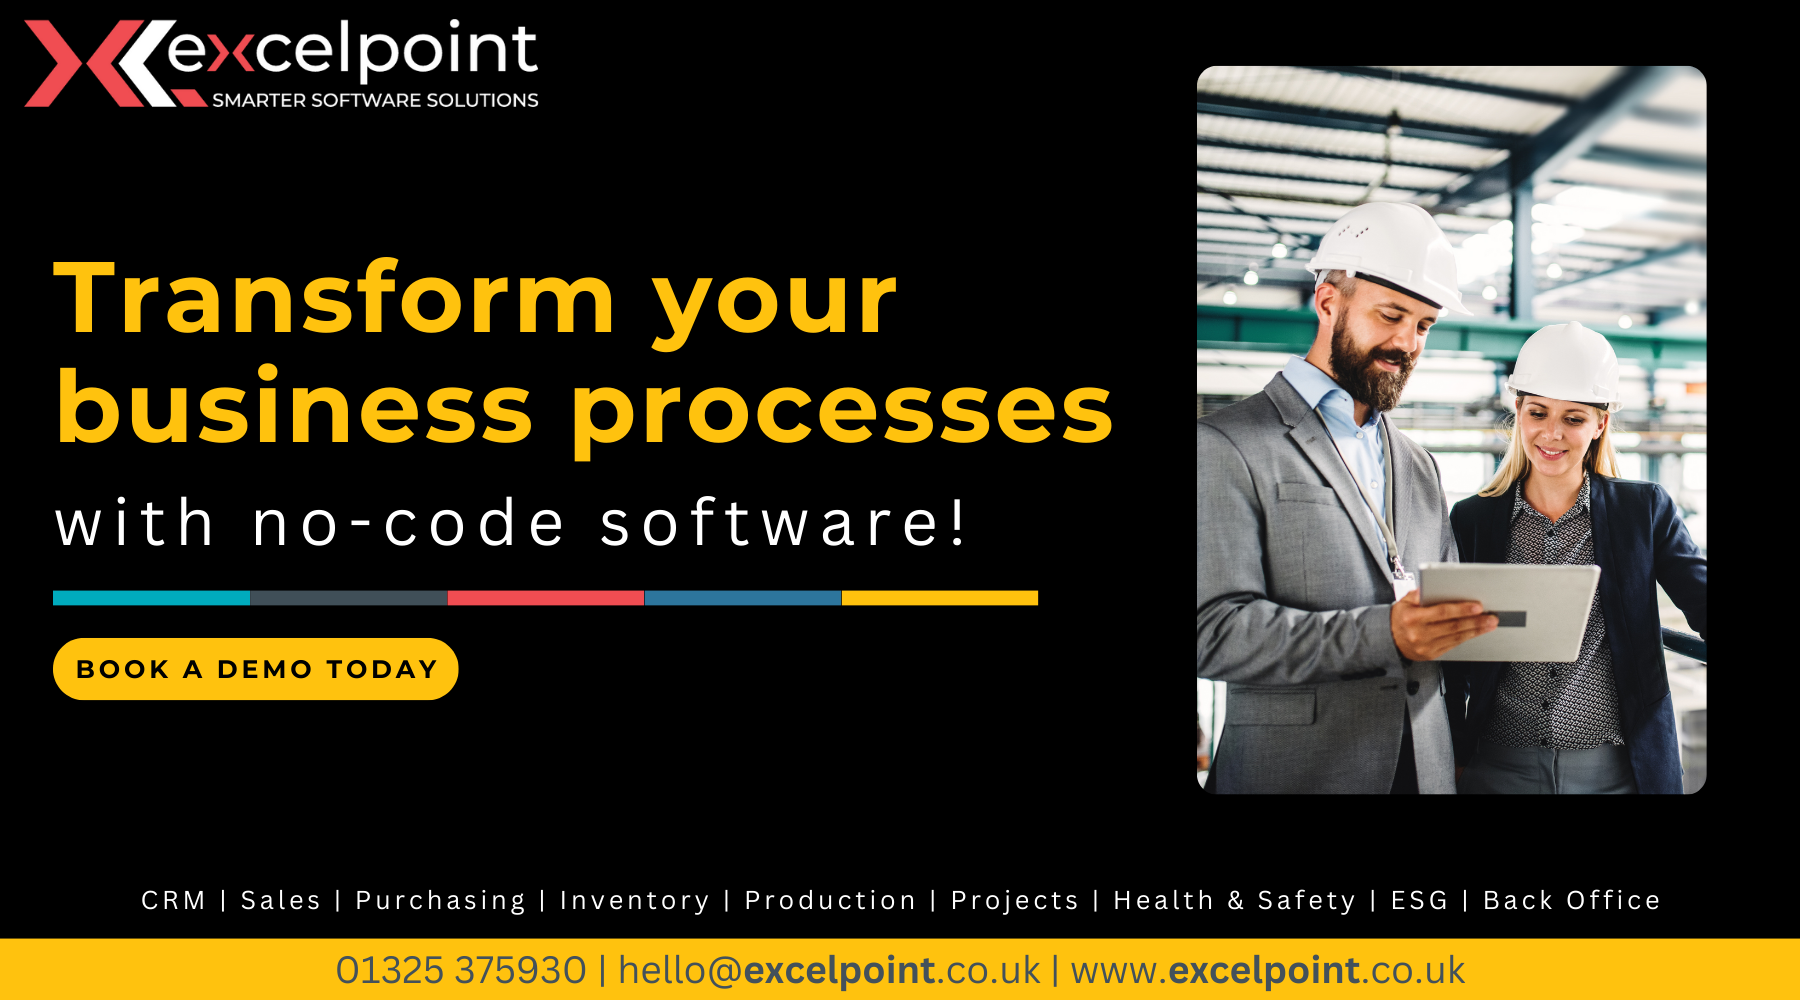 Transform Your Business Processes with Excelpoint’s No-Code Software